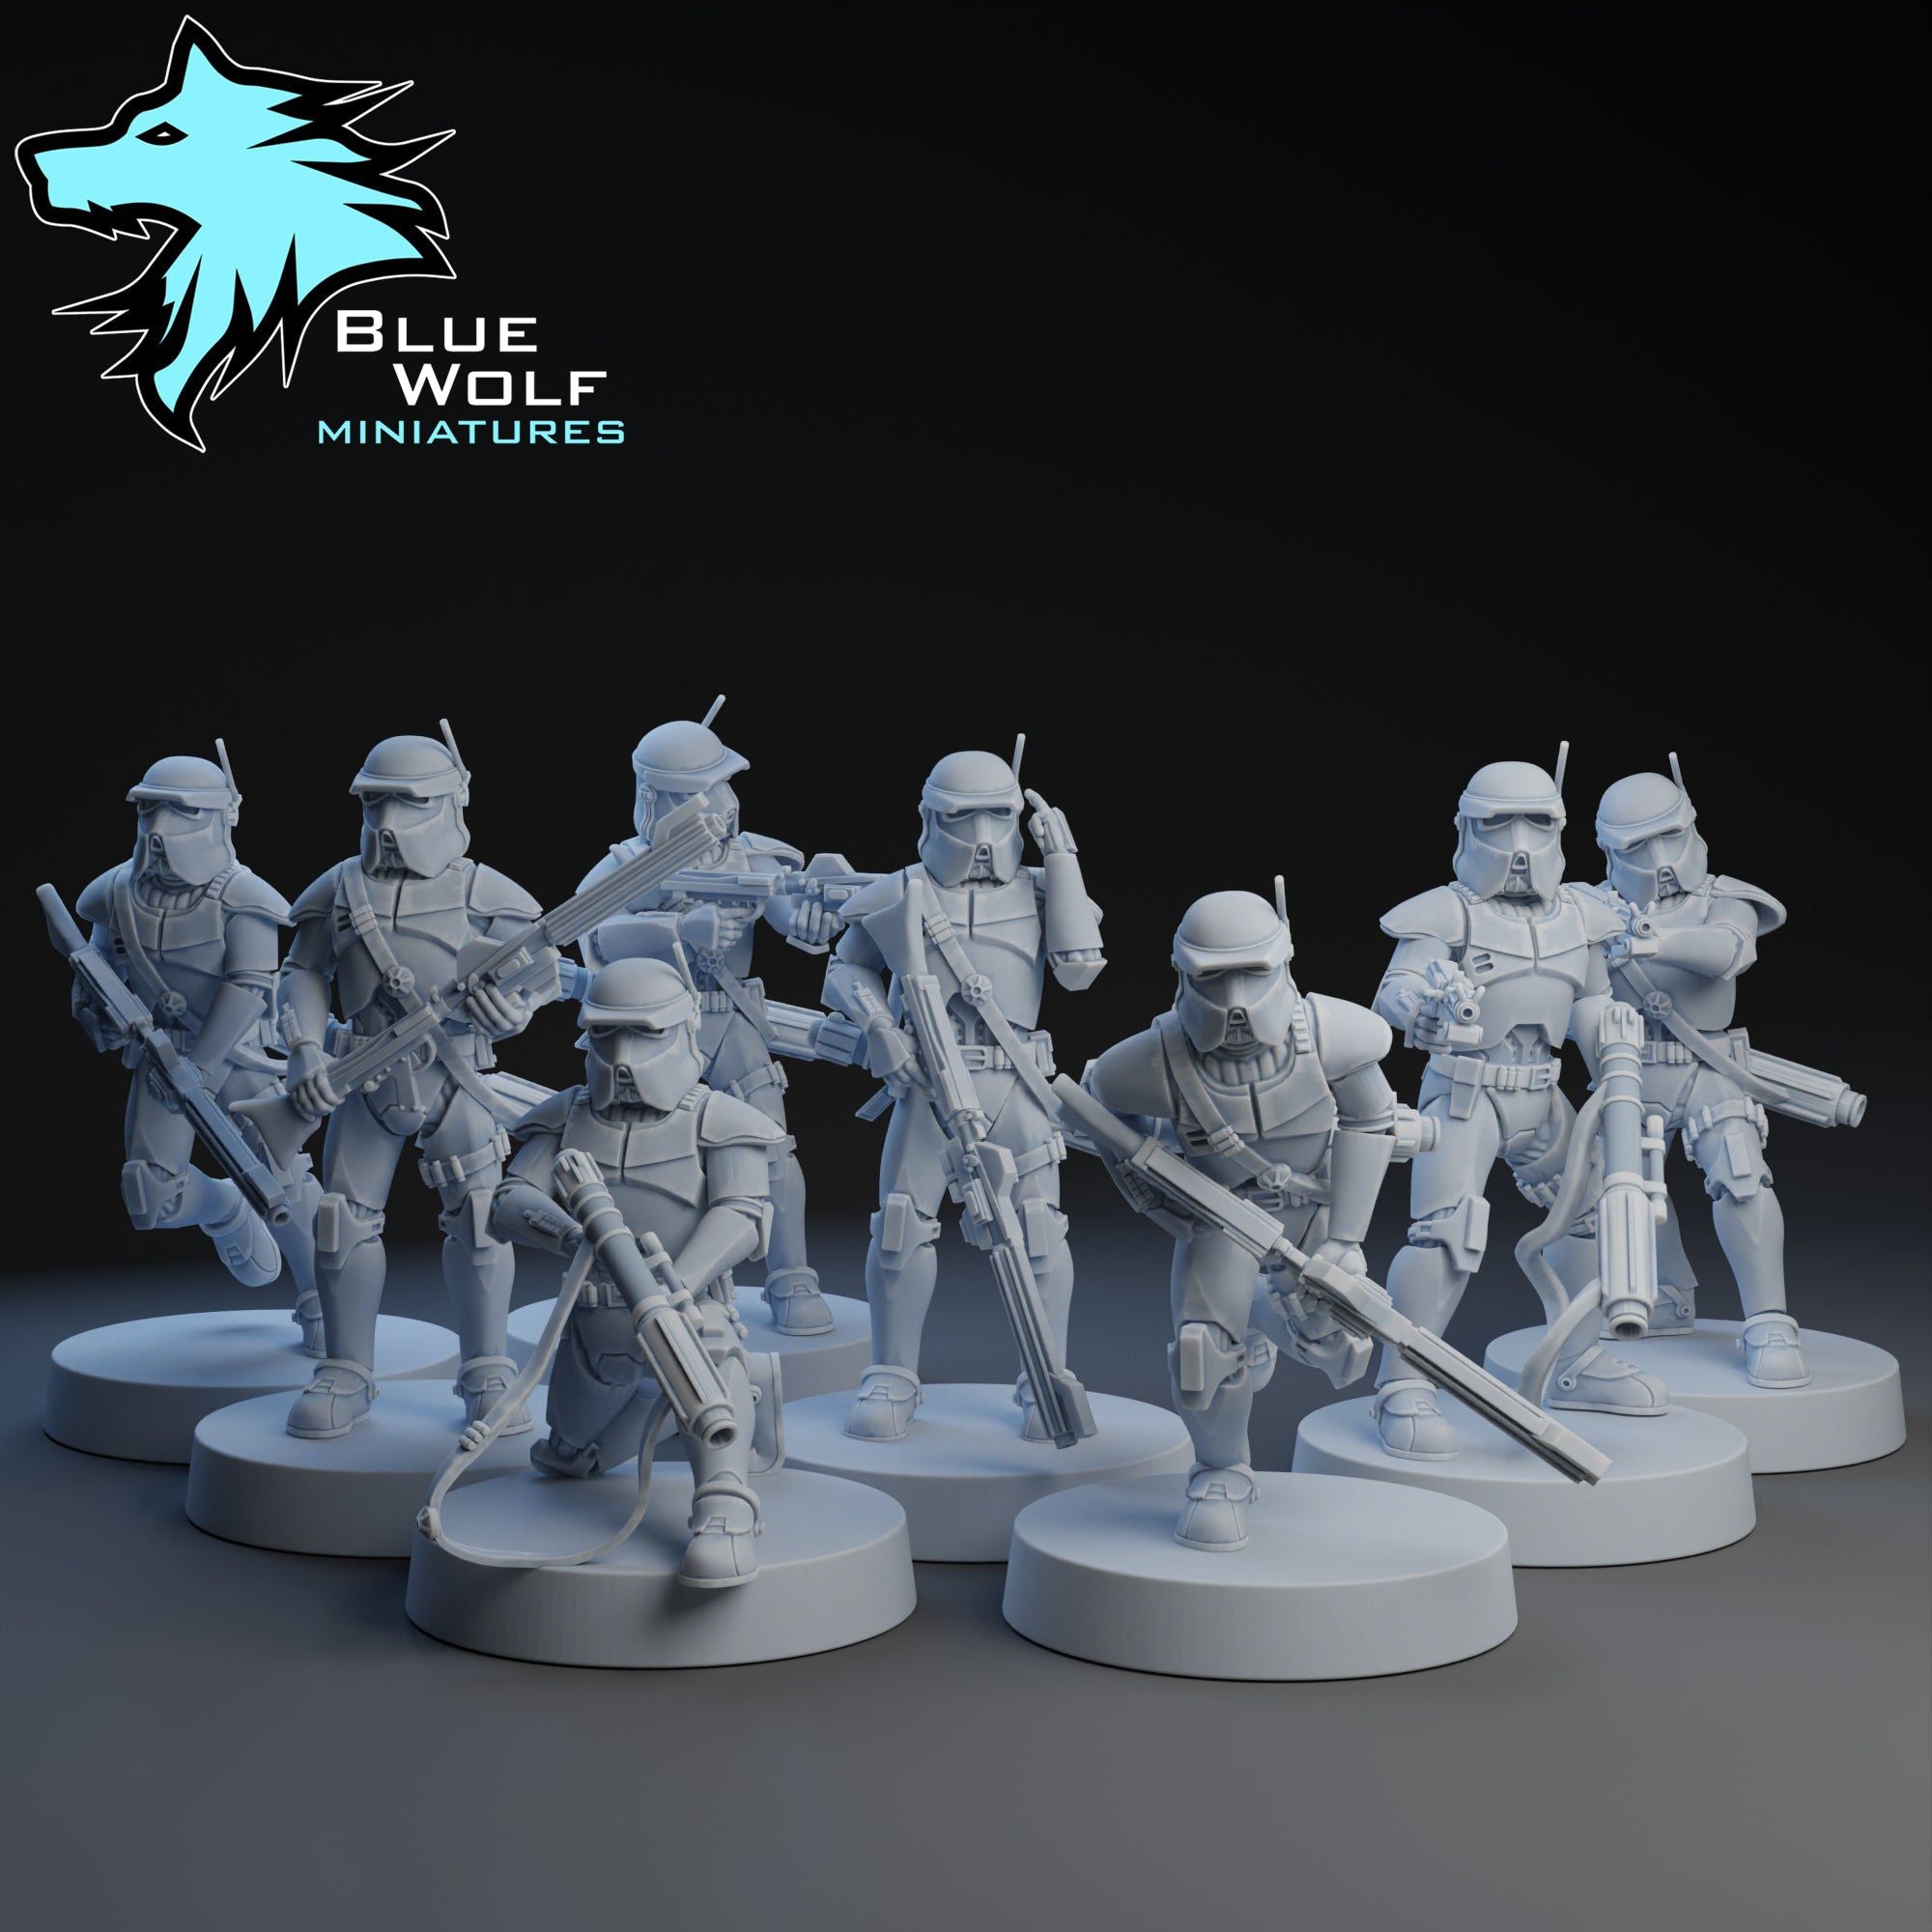 AT-RT Drivers ‧ 8 Varianten ‧ Blue Wolf Miniatures ‧ 1:48 Scale ‧ 35mm